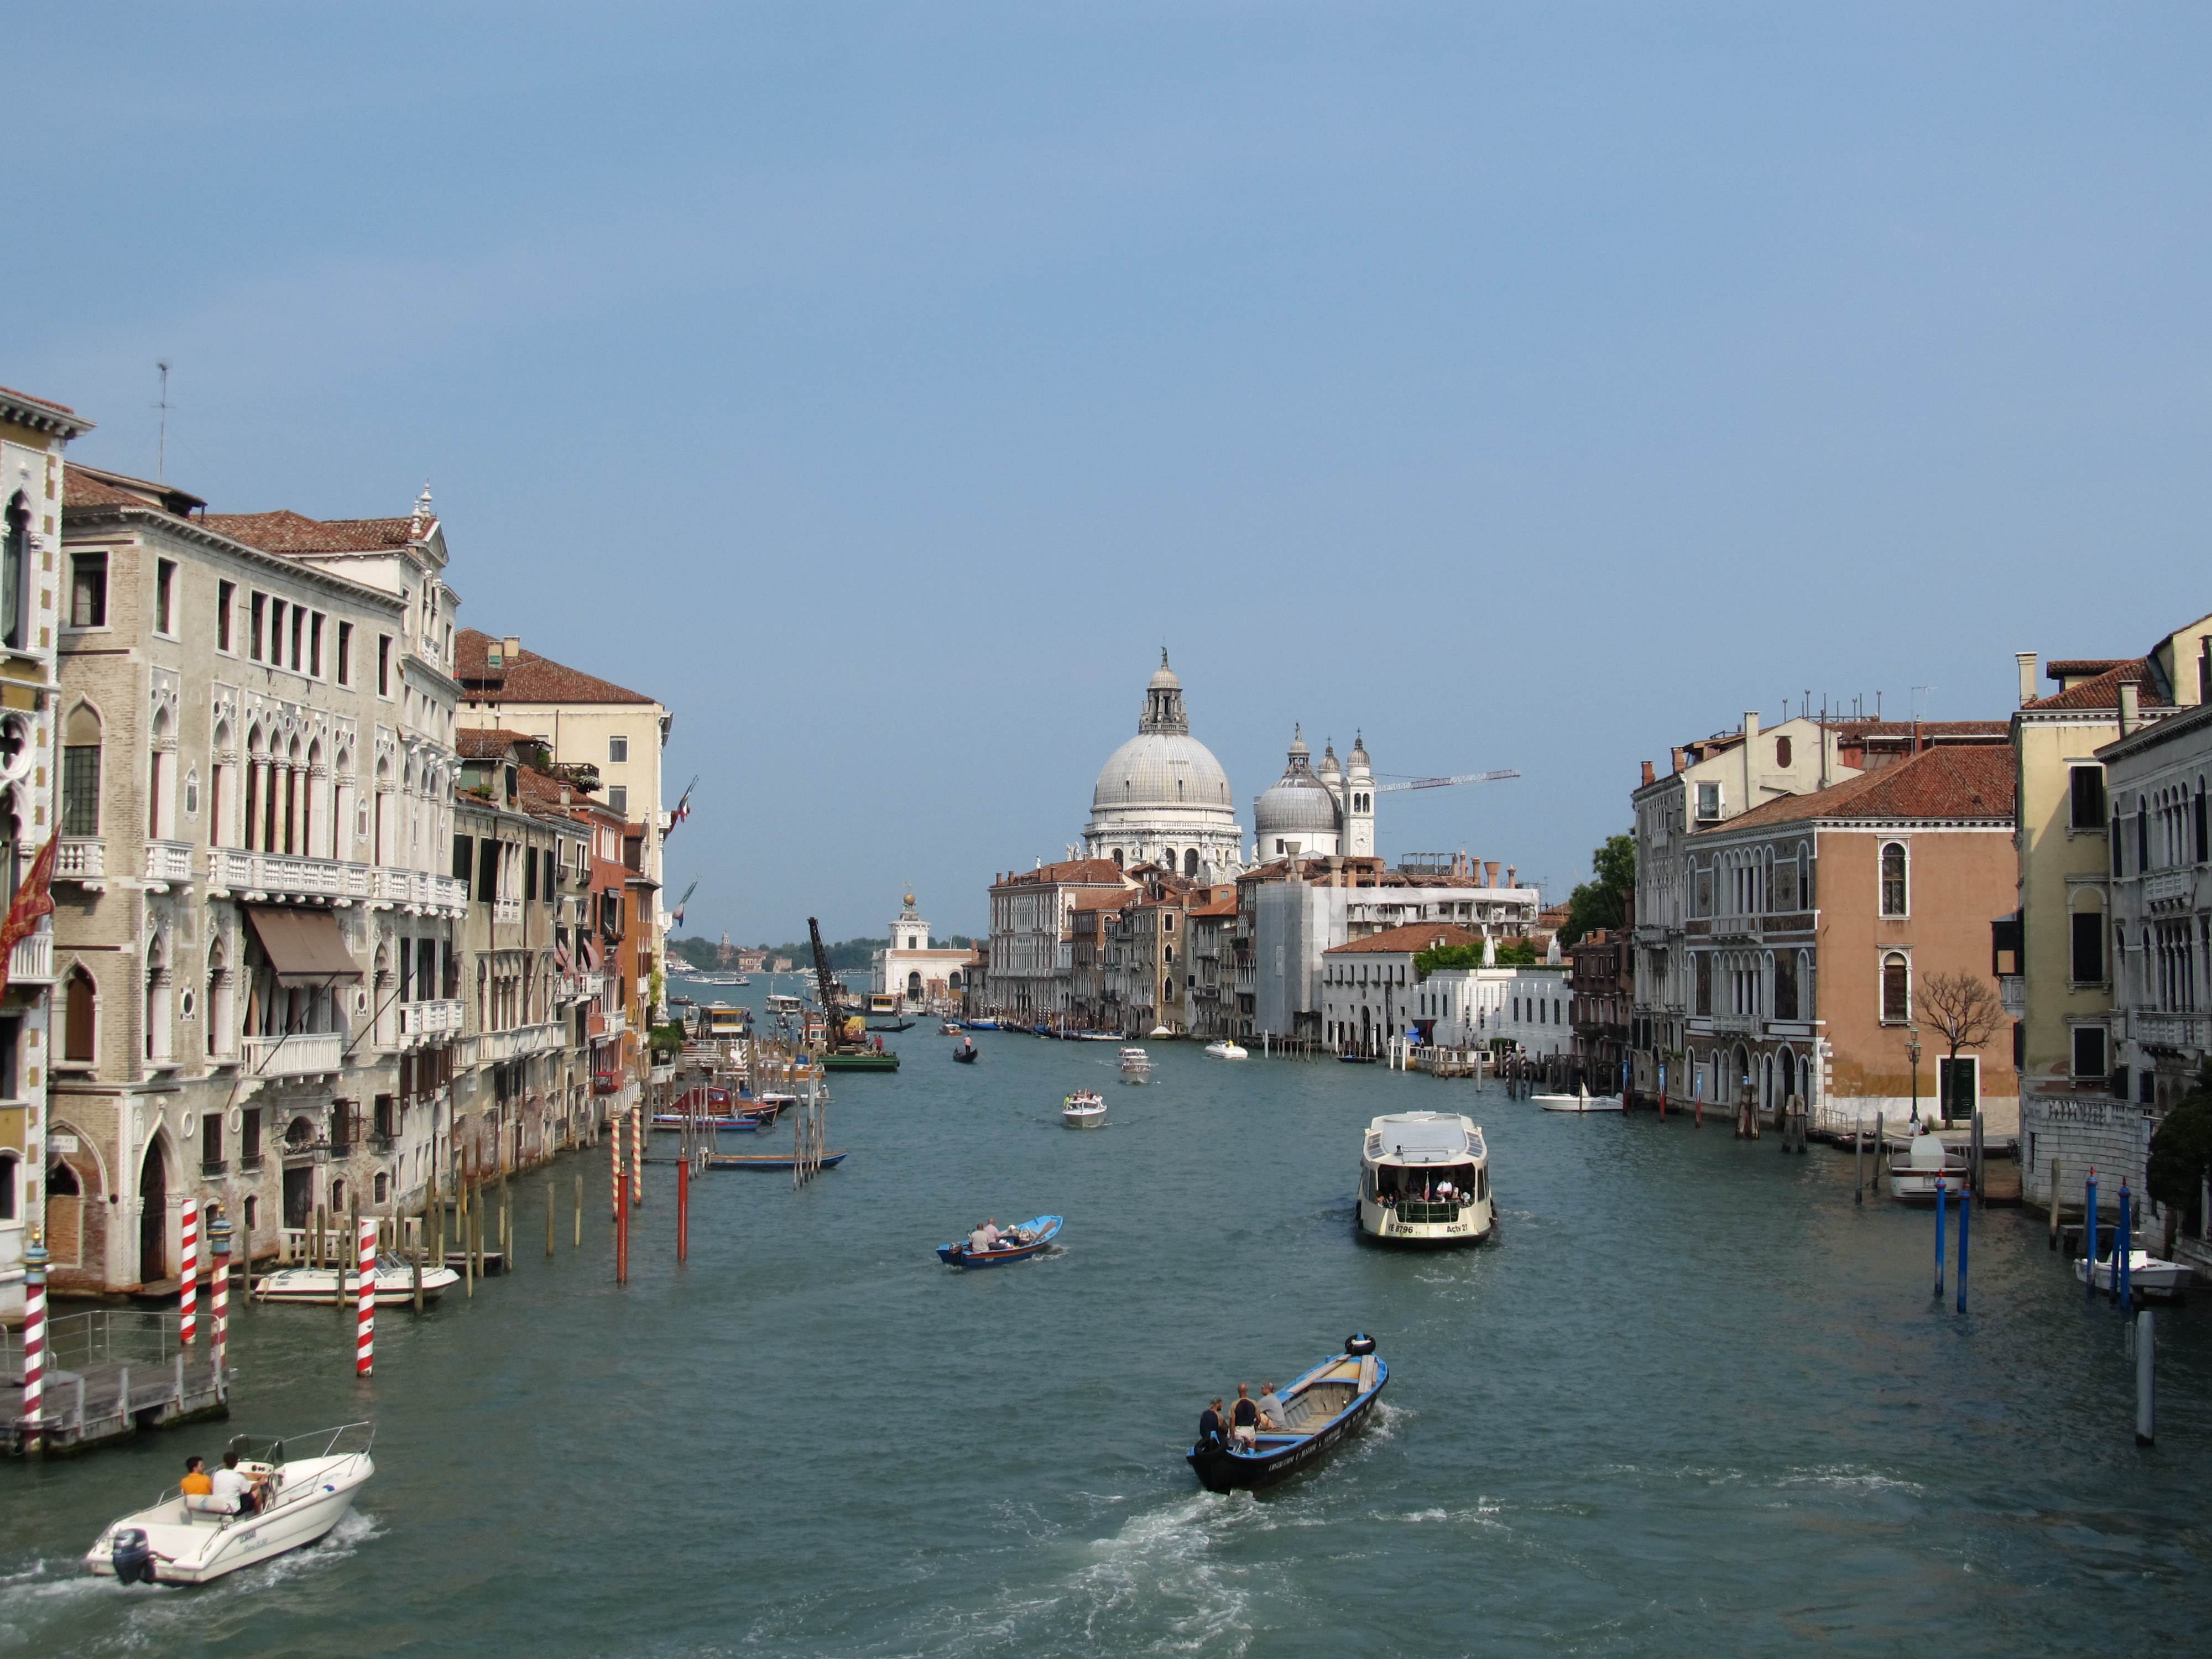 Venice is a favorite among romantics, and unquestionably one of the top tourist attractions in Italy